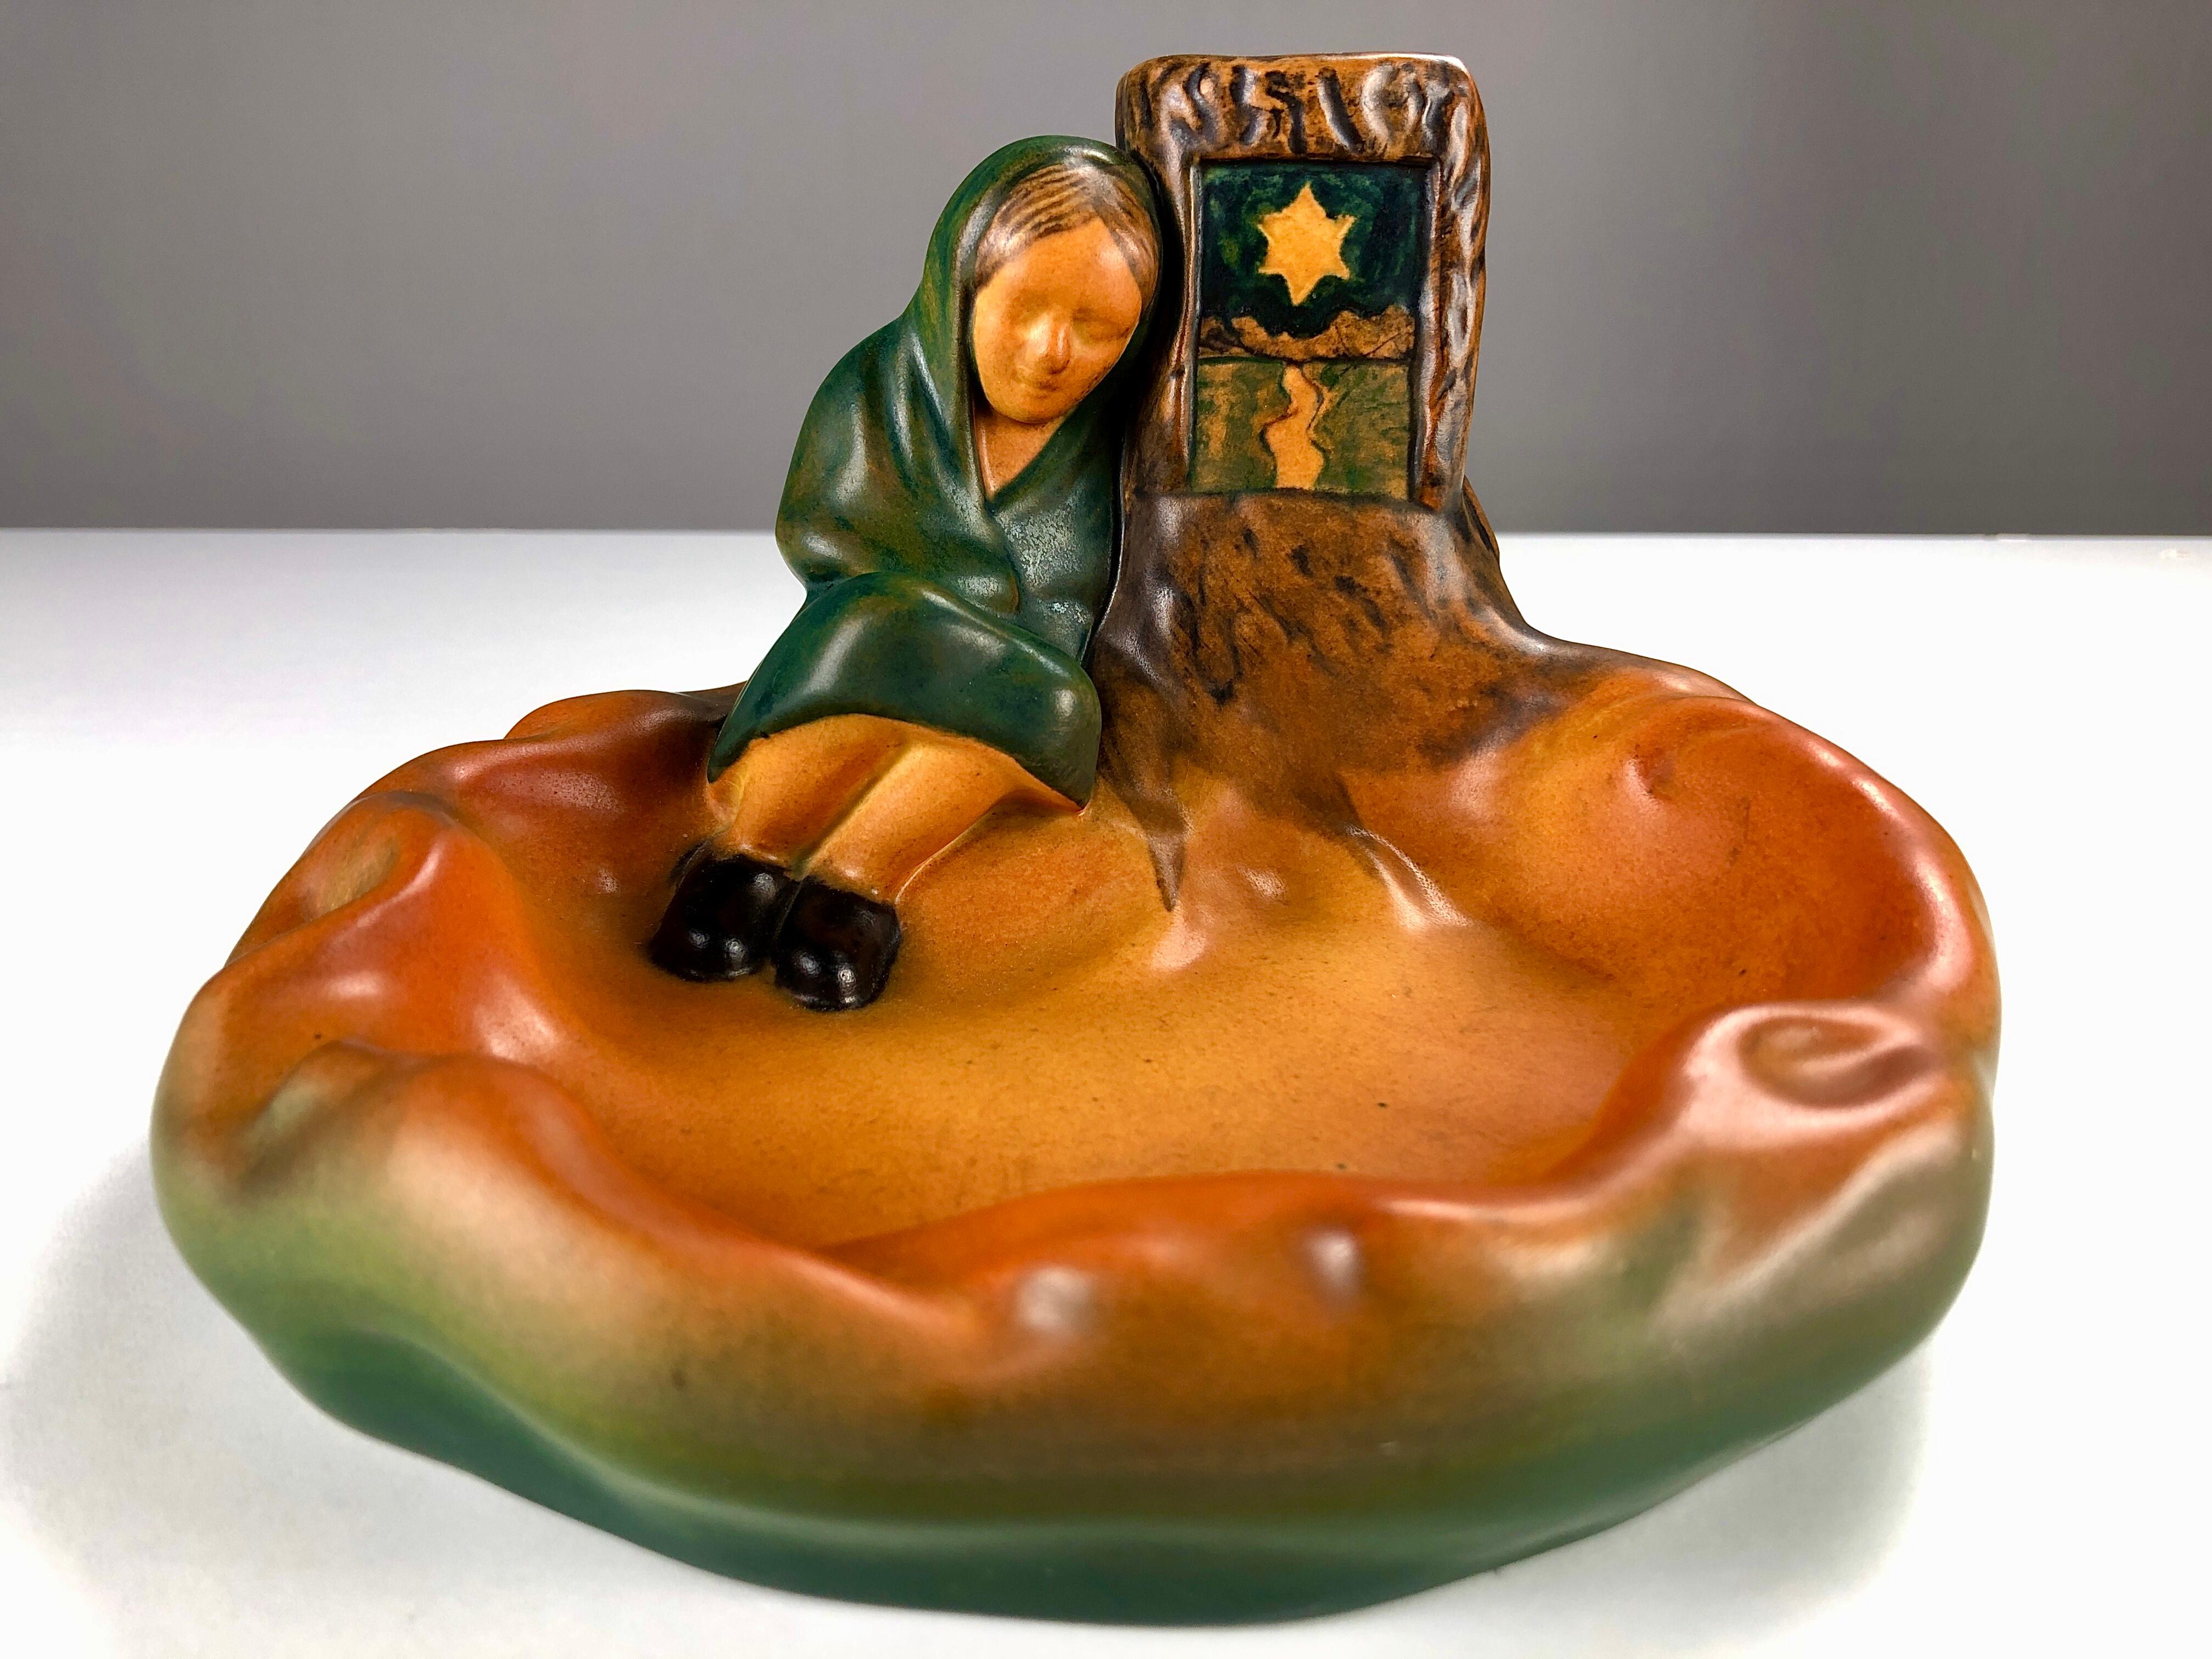 Danish Art Nouveau match holder and ash tray by Viggo N. Myhregaard for P. Ipsens Enke in 1924

The handcrafted art nuveau match holder and ash tray was inspired by H.C. Andersens farytale 